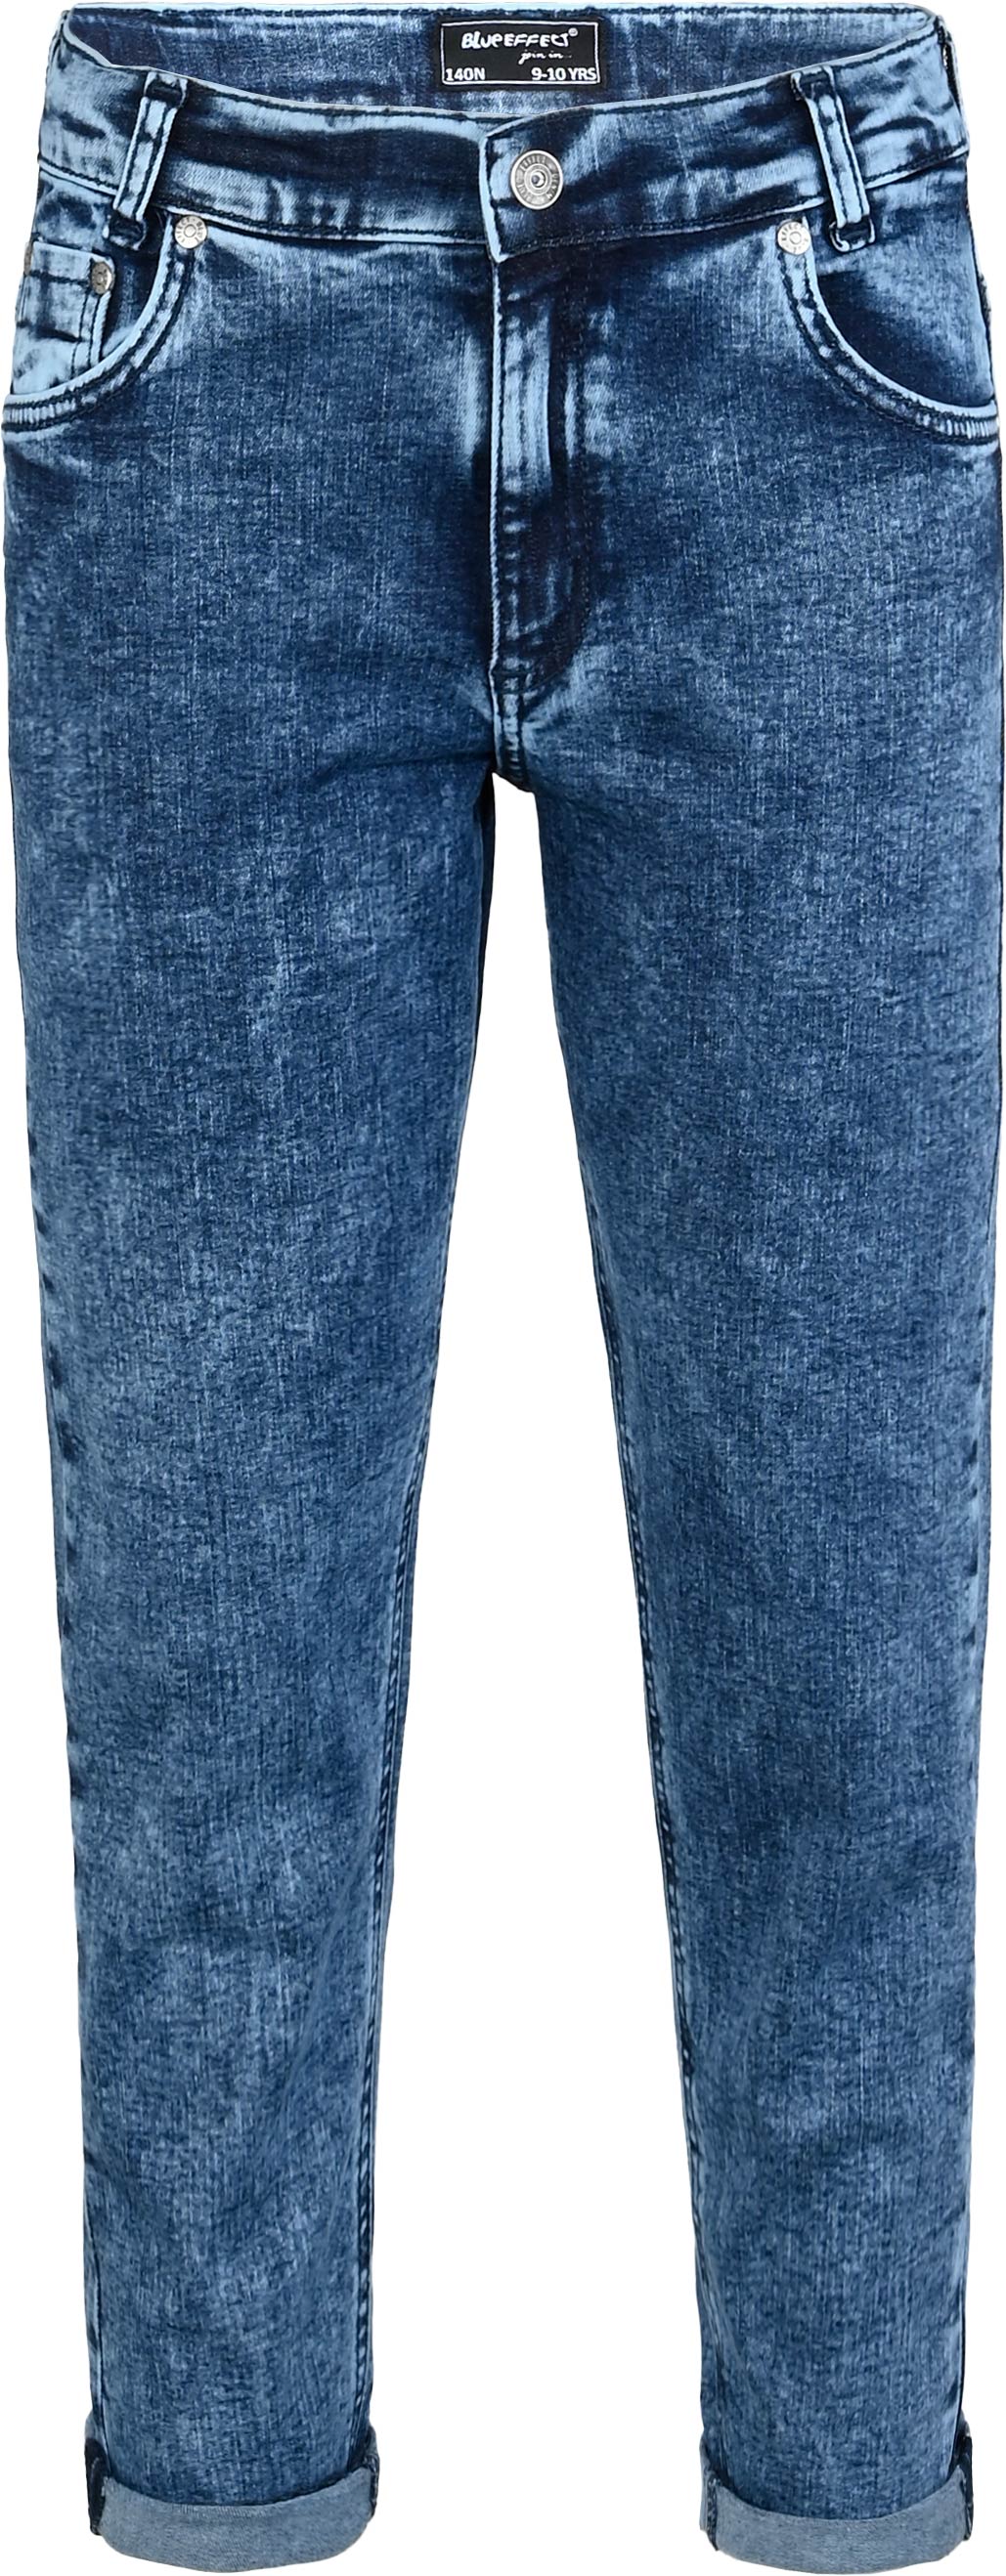 2826-NOS Boys Wide Leg Jeans Cropped, available in Normal